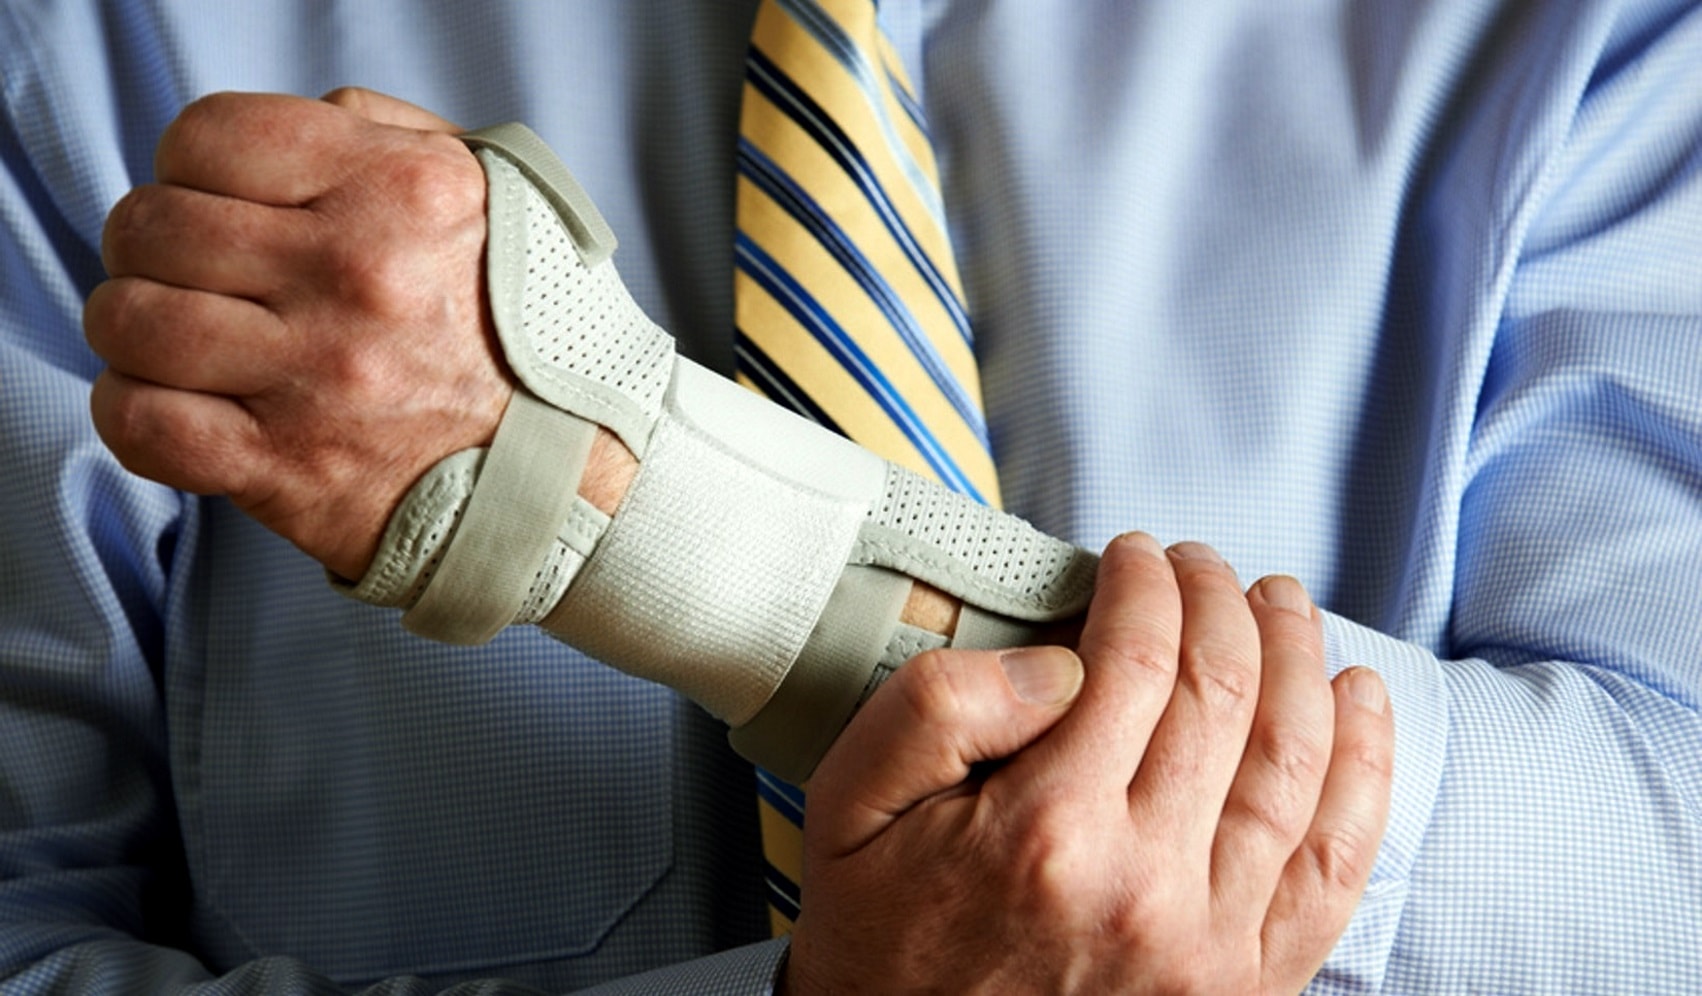 Work Related Carpal Tunnel Syndrome